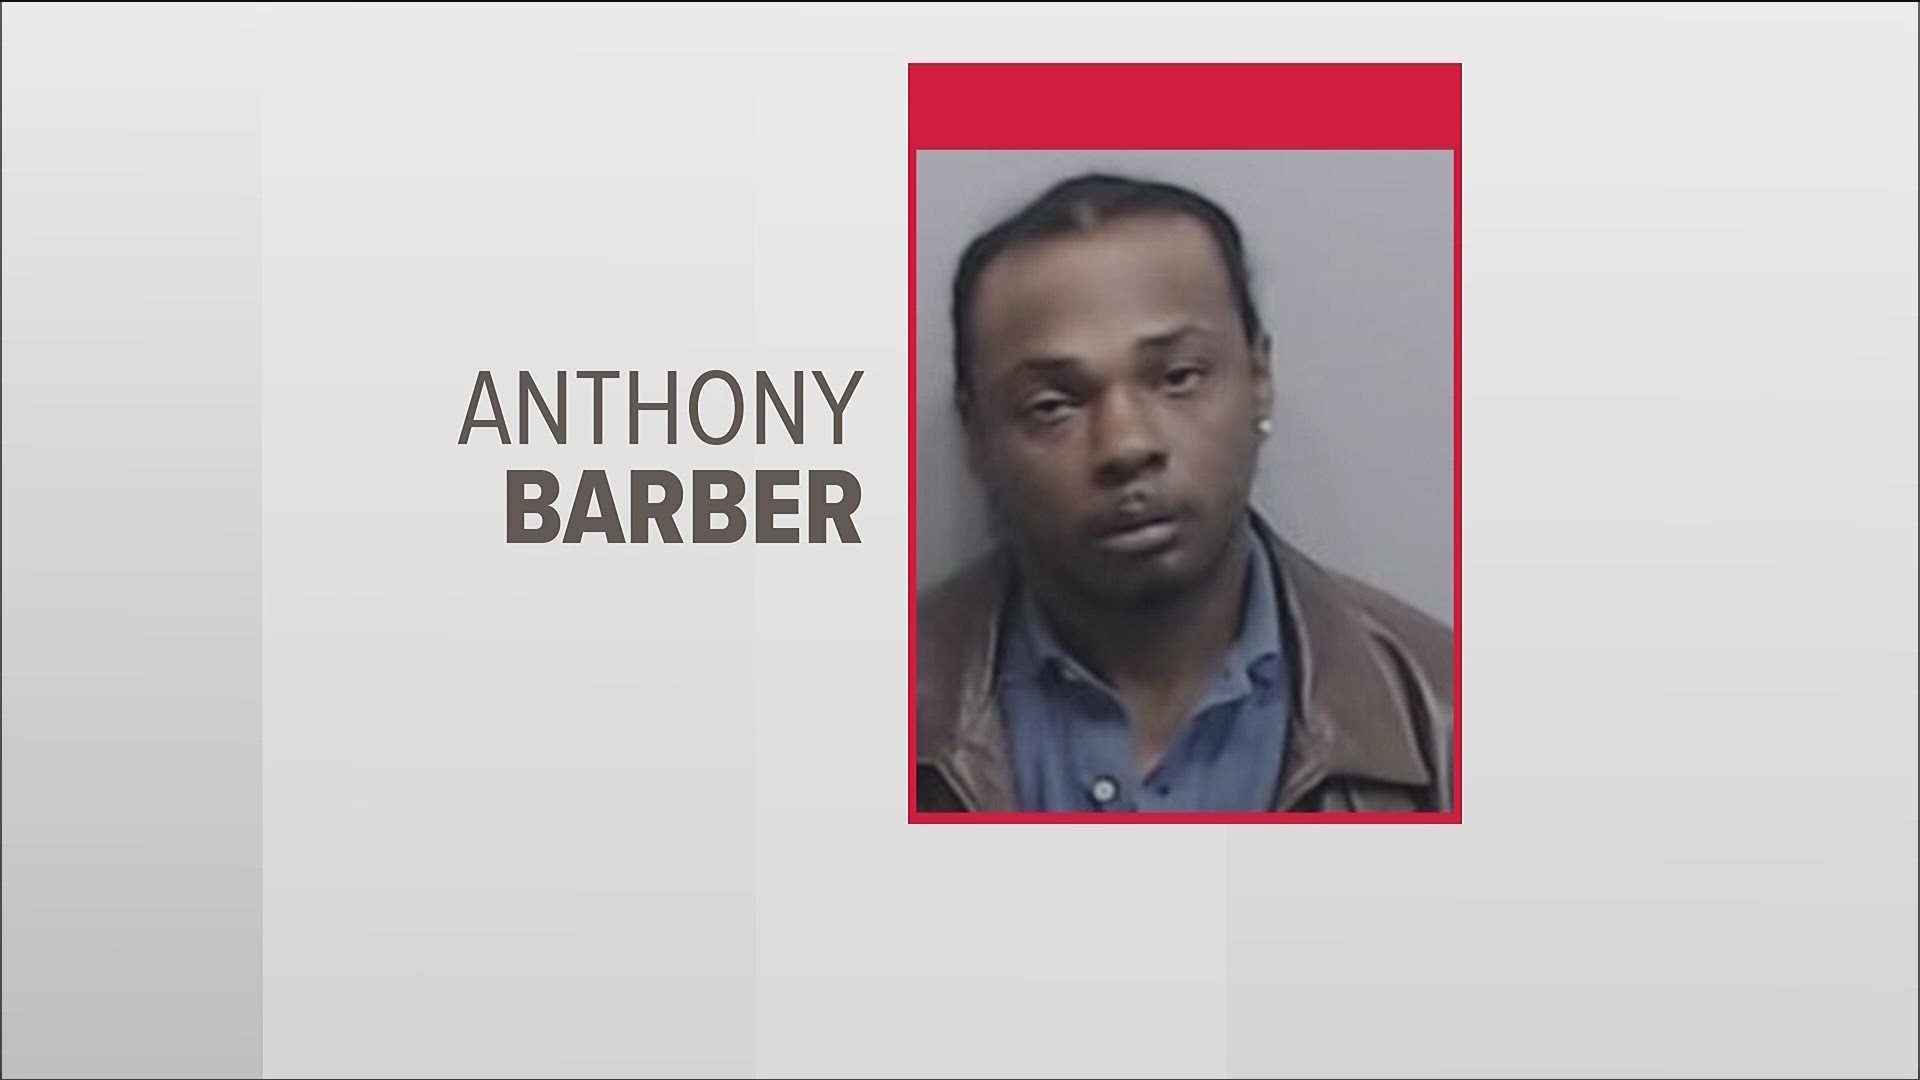 Anthony Barber killed a woman because he "didn't like her friendship with his girlfriend," prosecutors said.